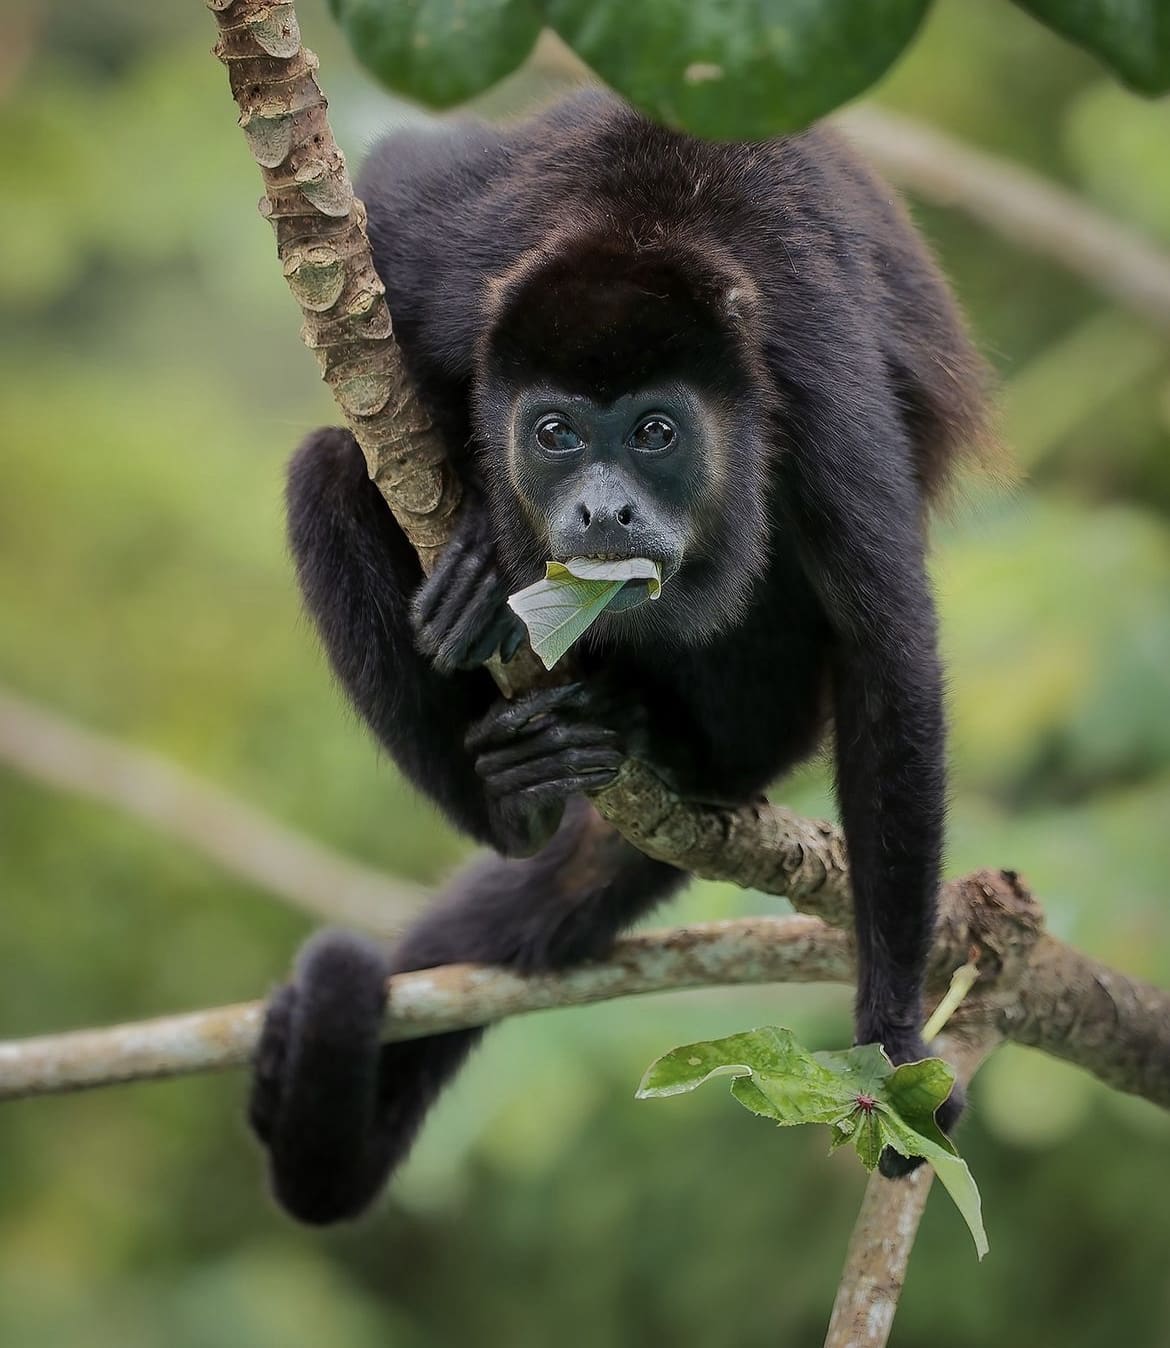 Mantled Howler Monkey munching on cecropia leaves